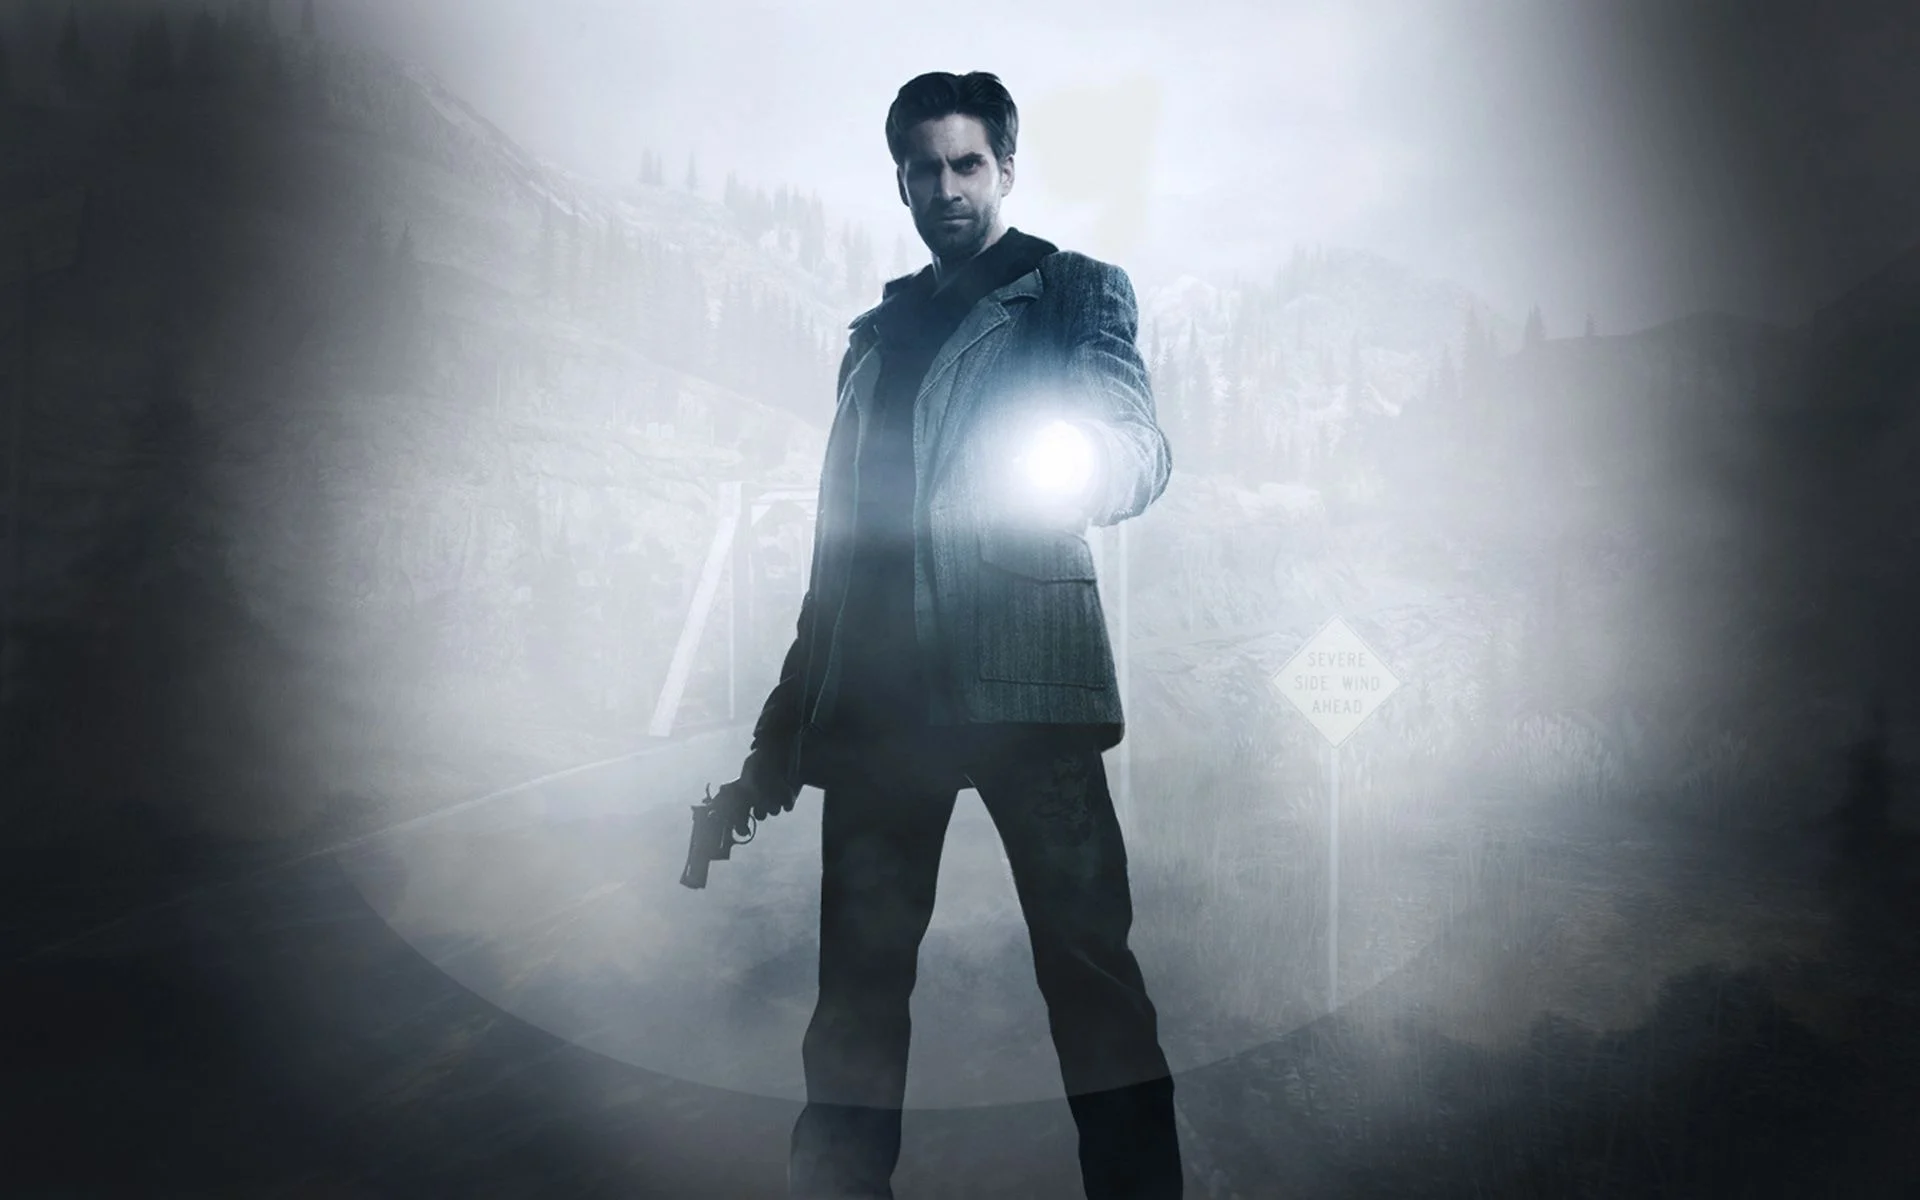 The Alan Wake series is without a showrunner